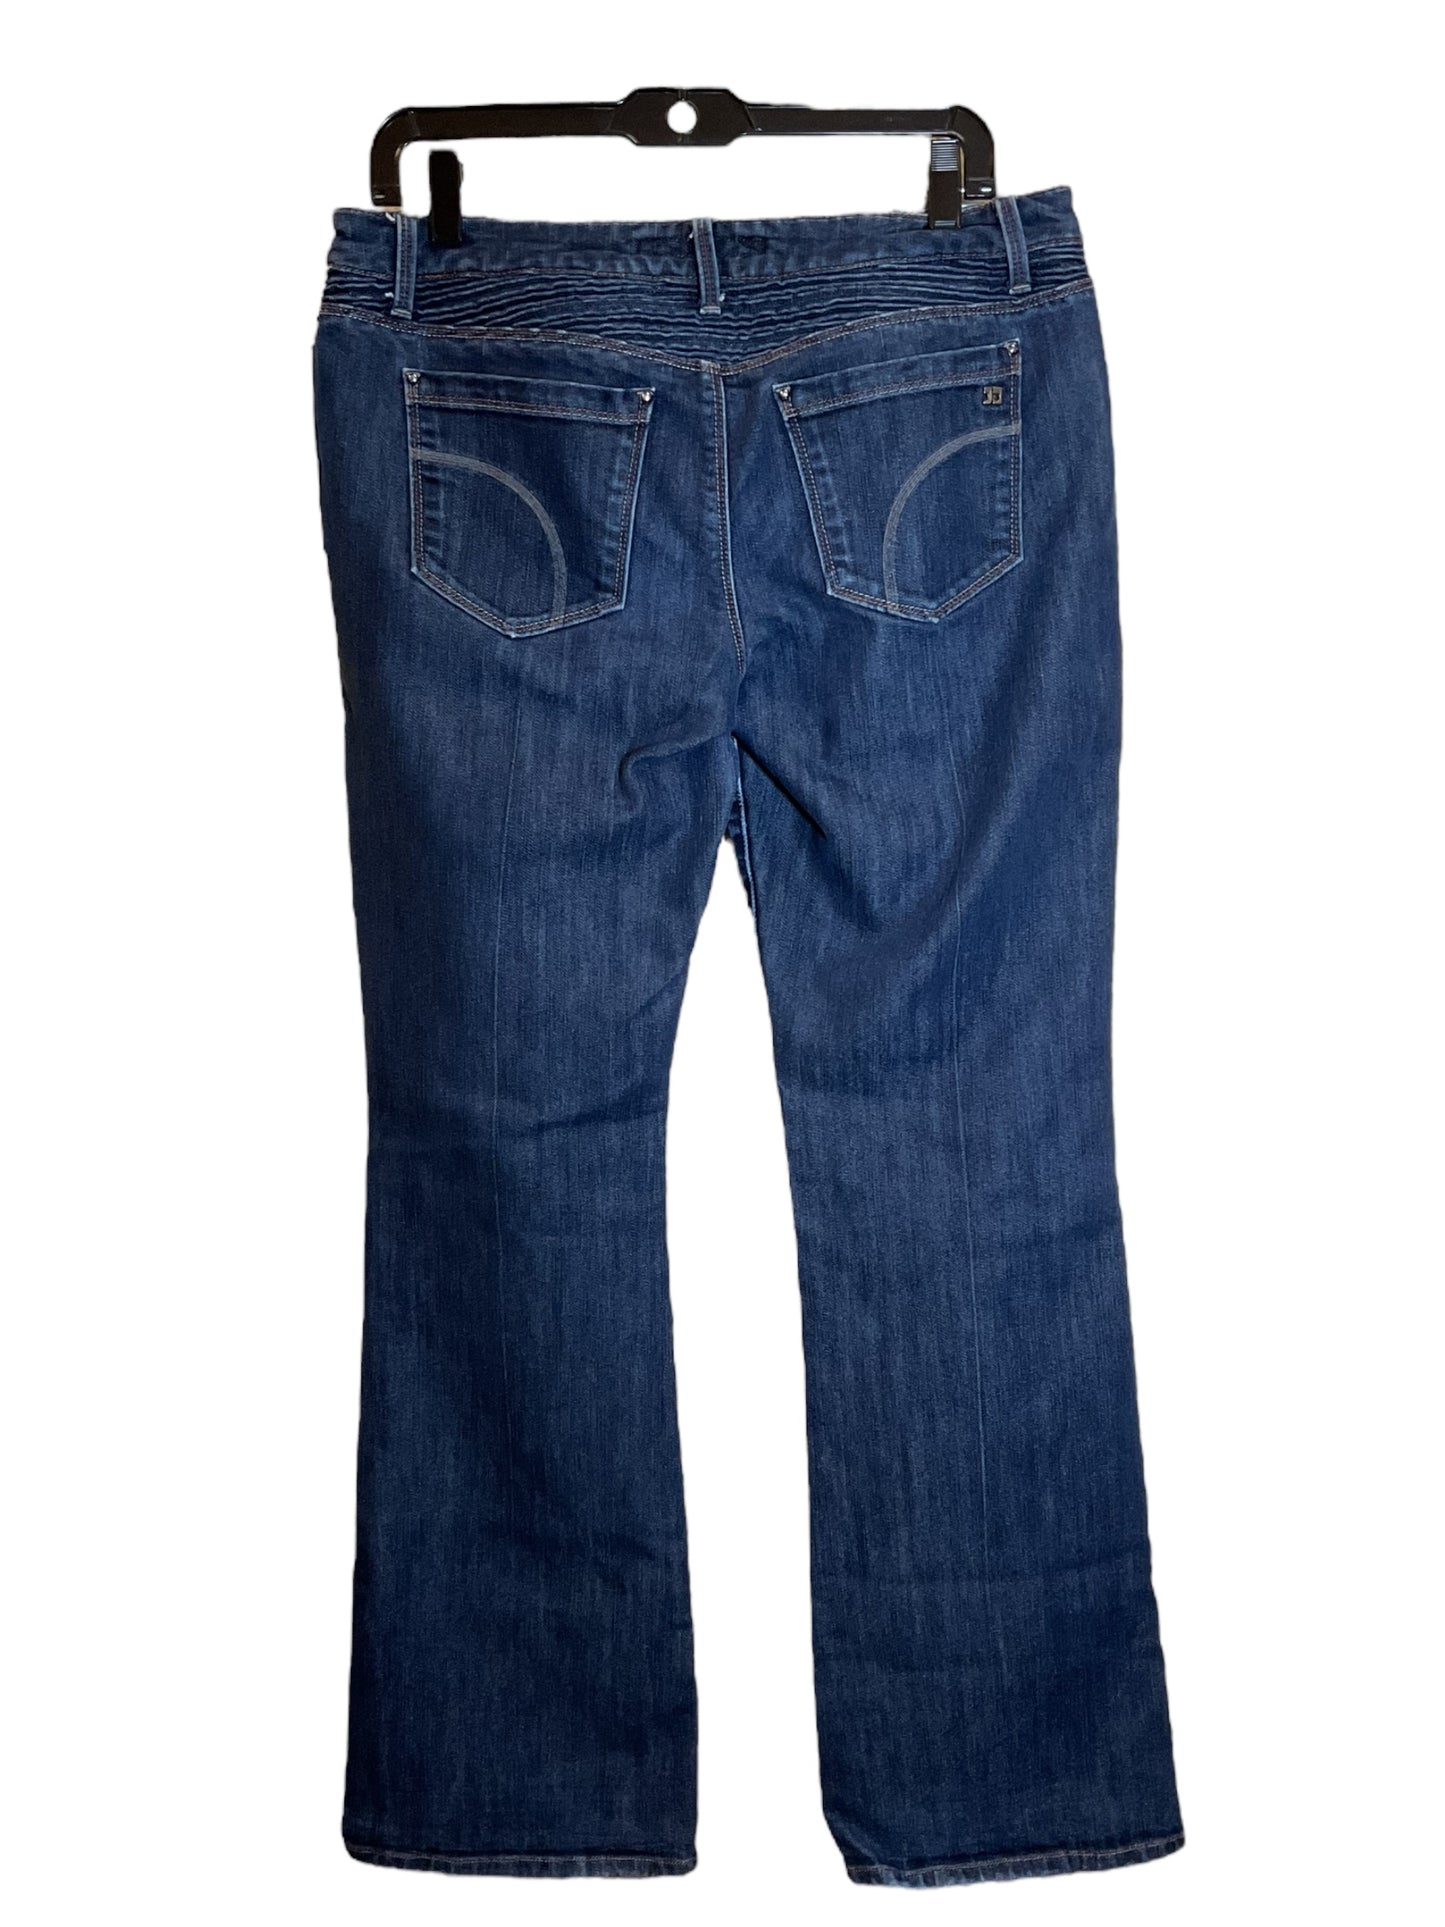 Jeans Straight By Joes Jeans  Size: 10